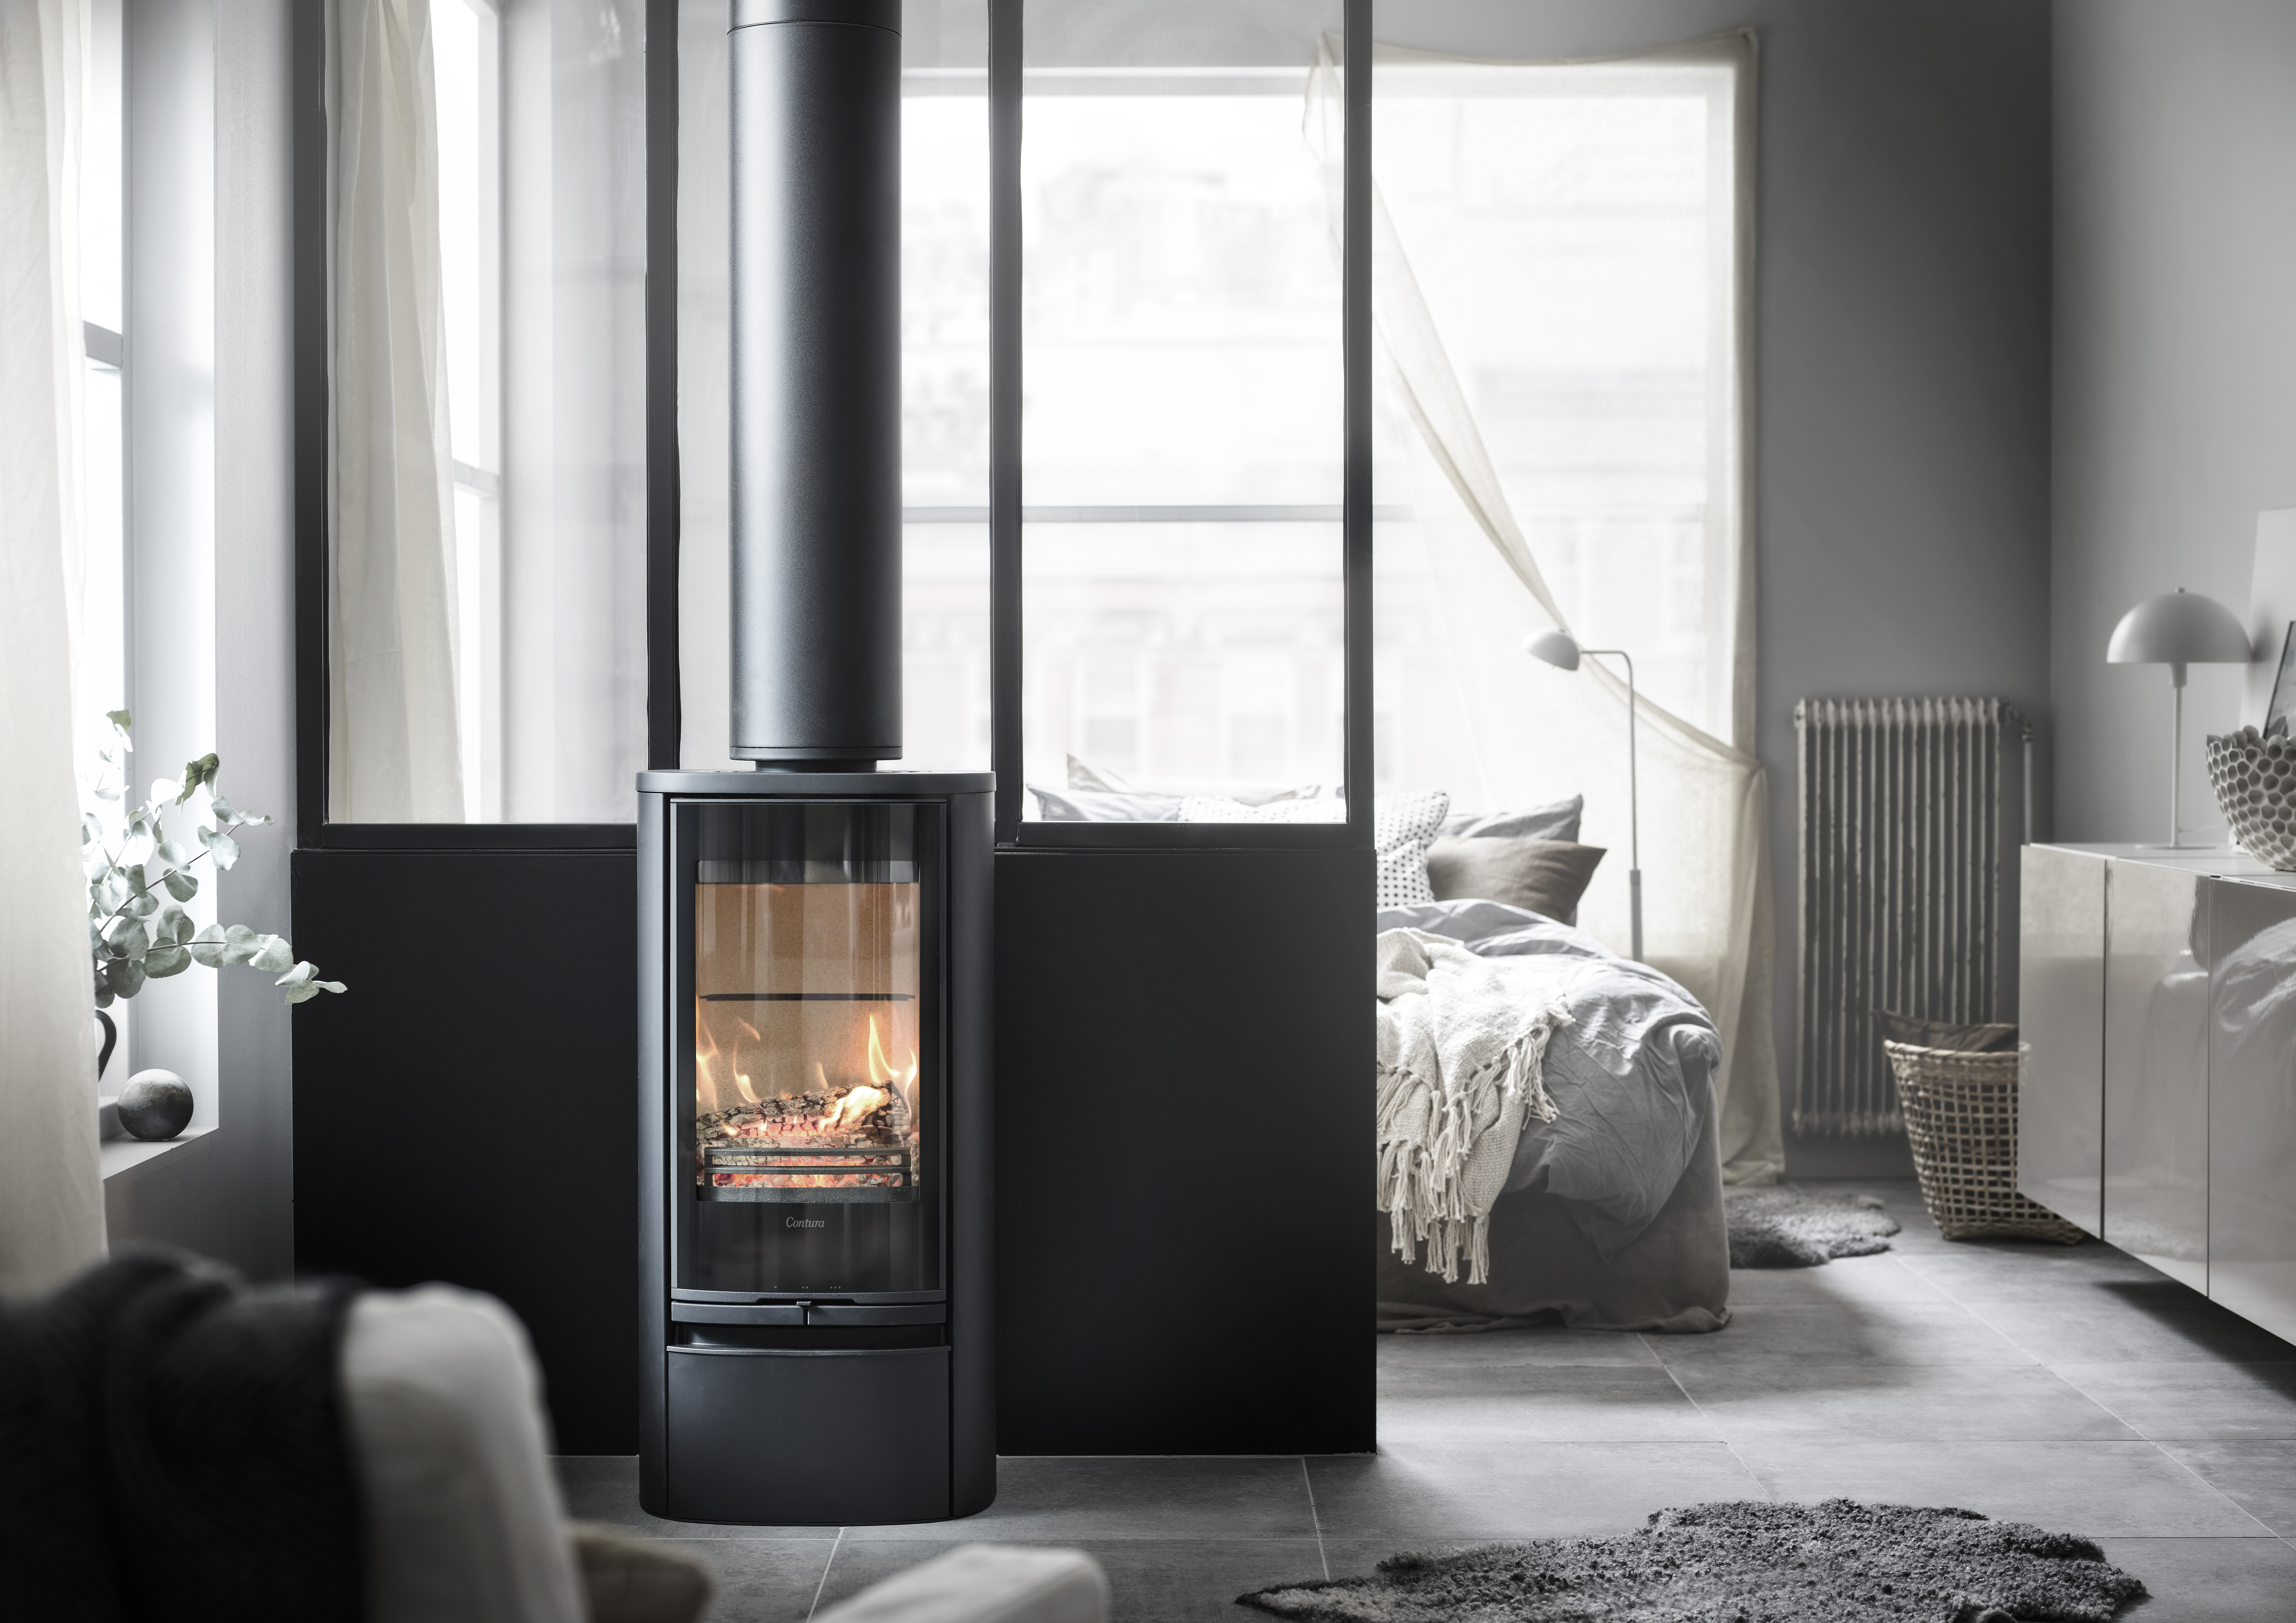 An example of a log burner in a bedroom. Home Statements